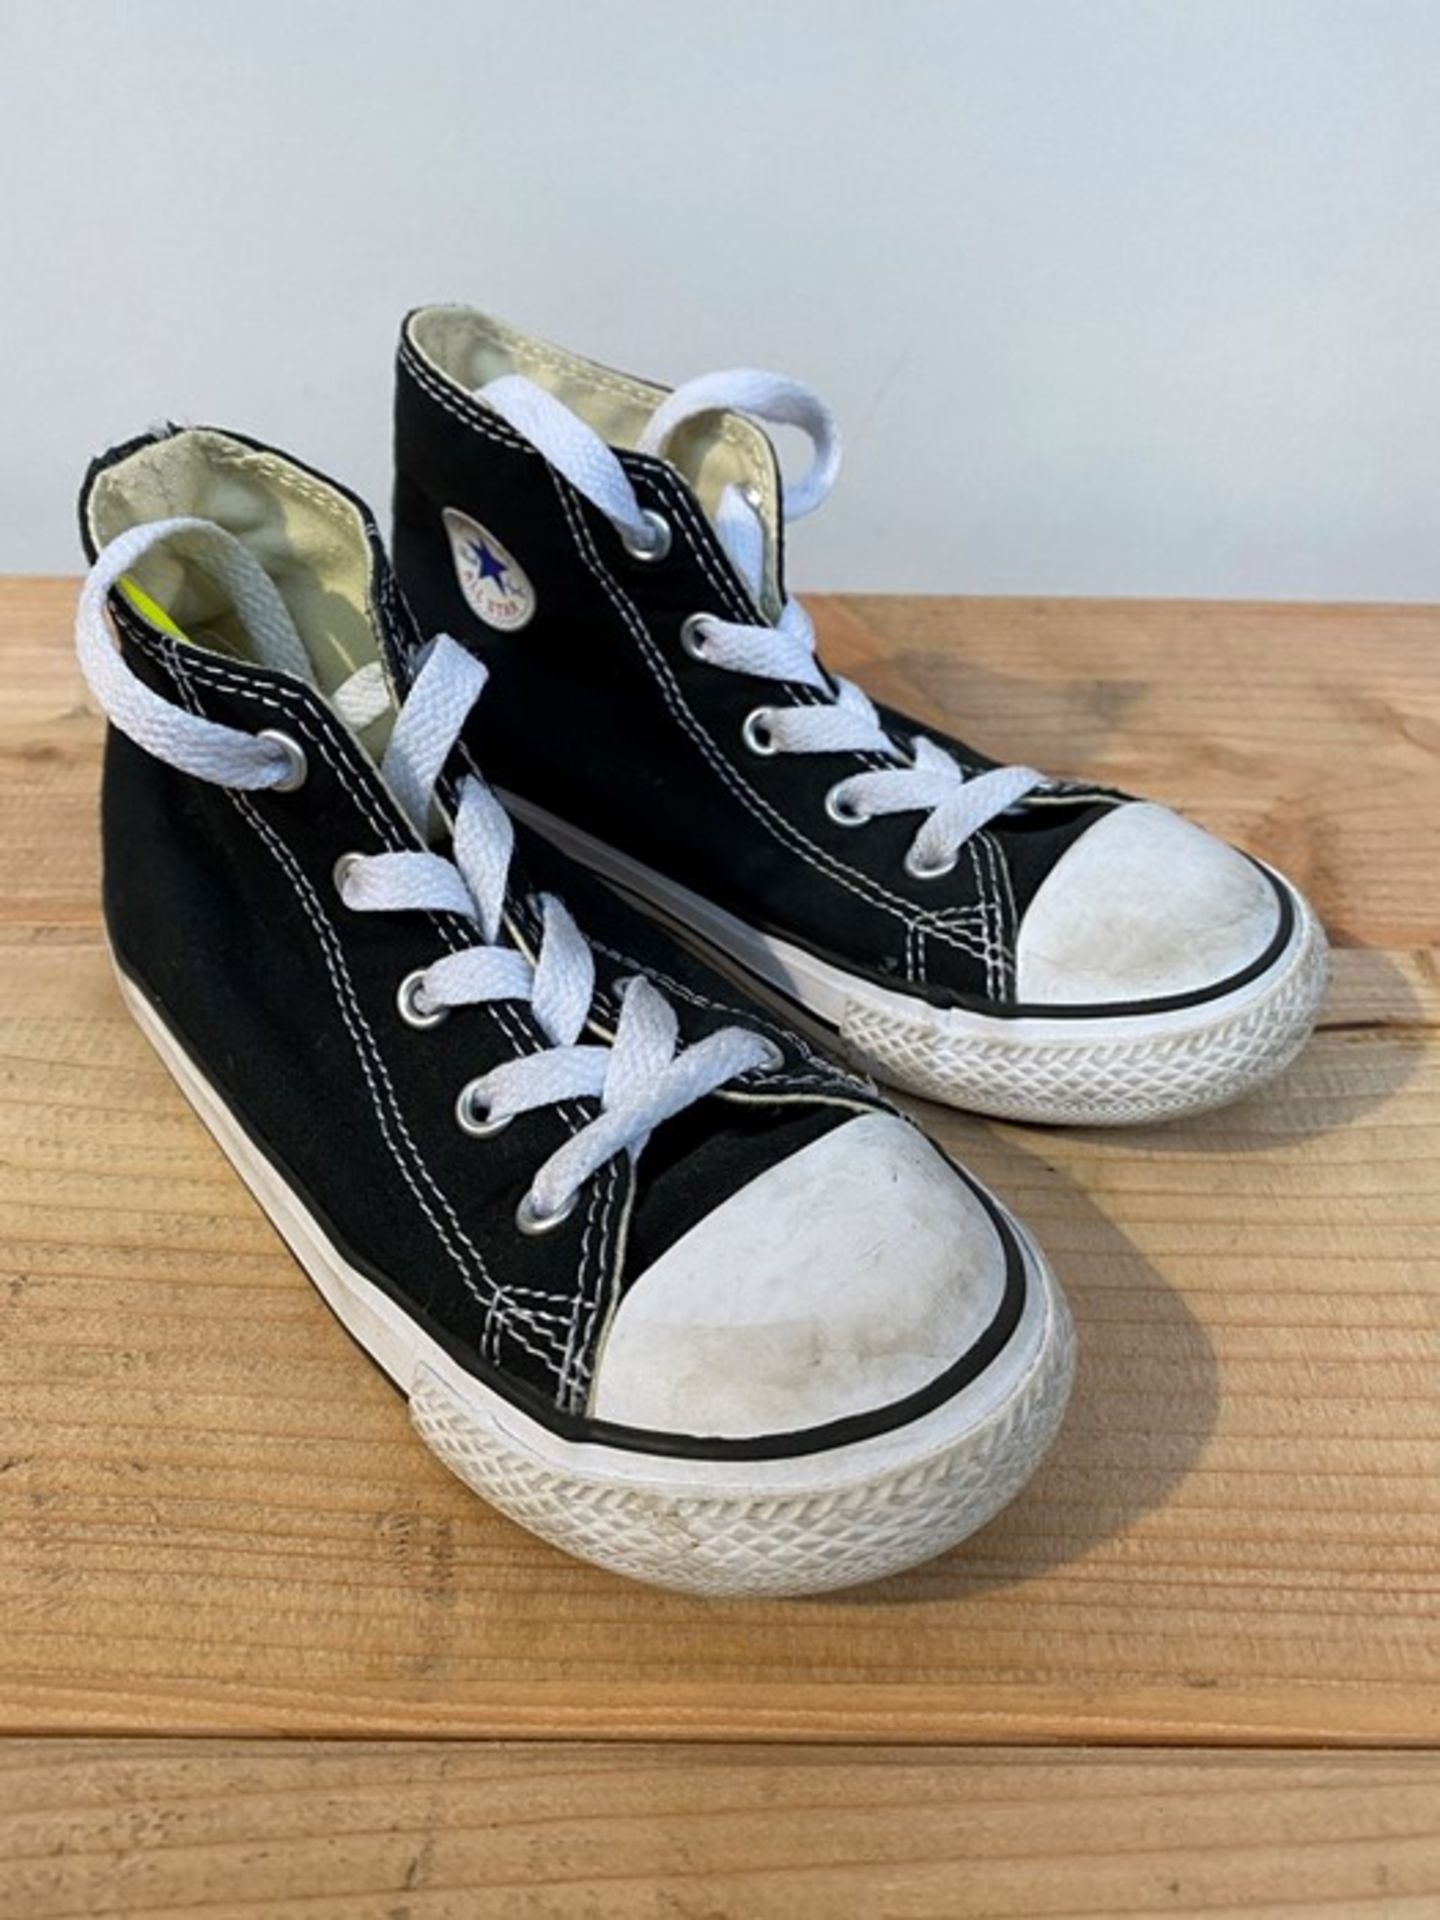 1 PAIR OF KID'S CONVERSE CHUCK TAYLOR ALL STAR CORE CANVAS HI TRAINERS IN BLACK / SIZE: 10 / RRP £